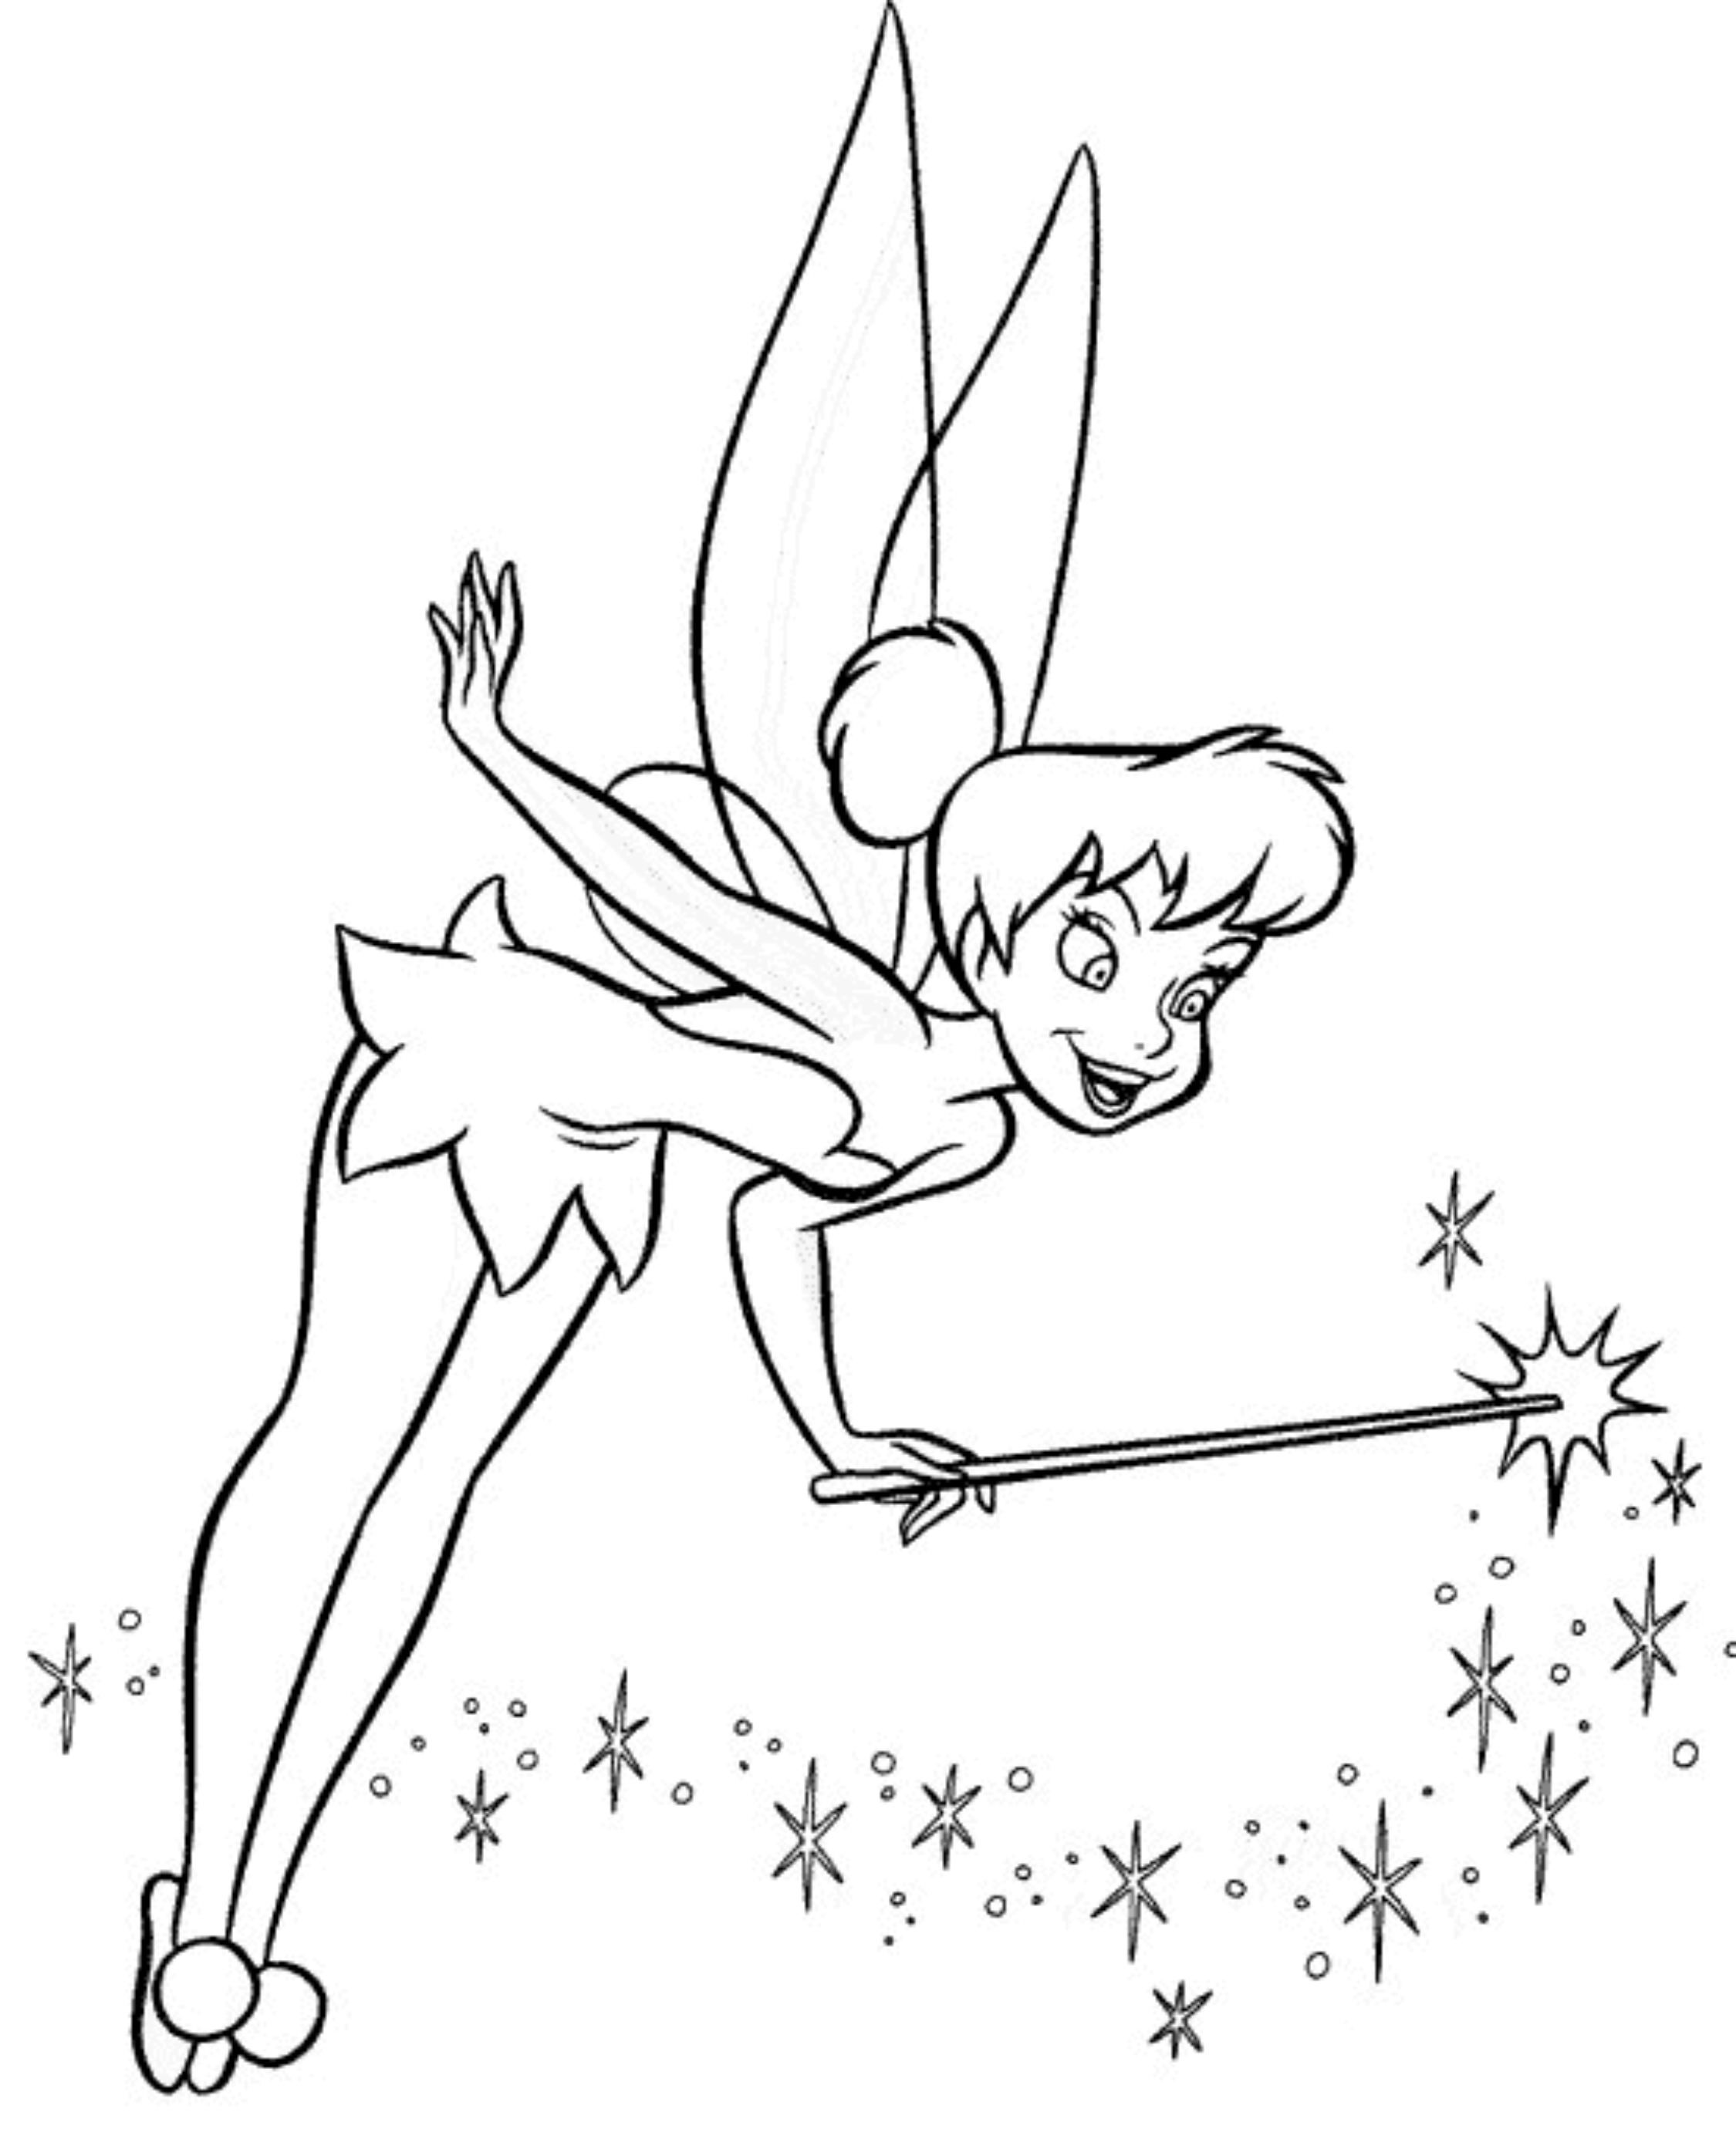 Fairy Princess Coloring Pages Free - High Quality Coloring Pages